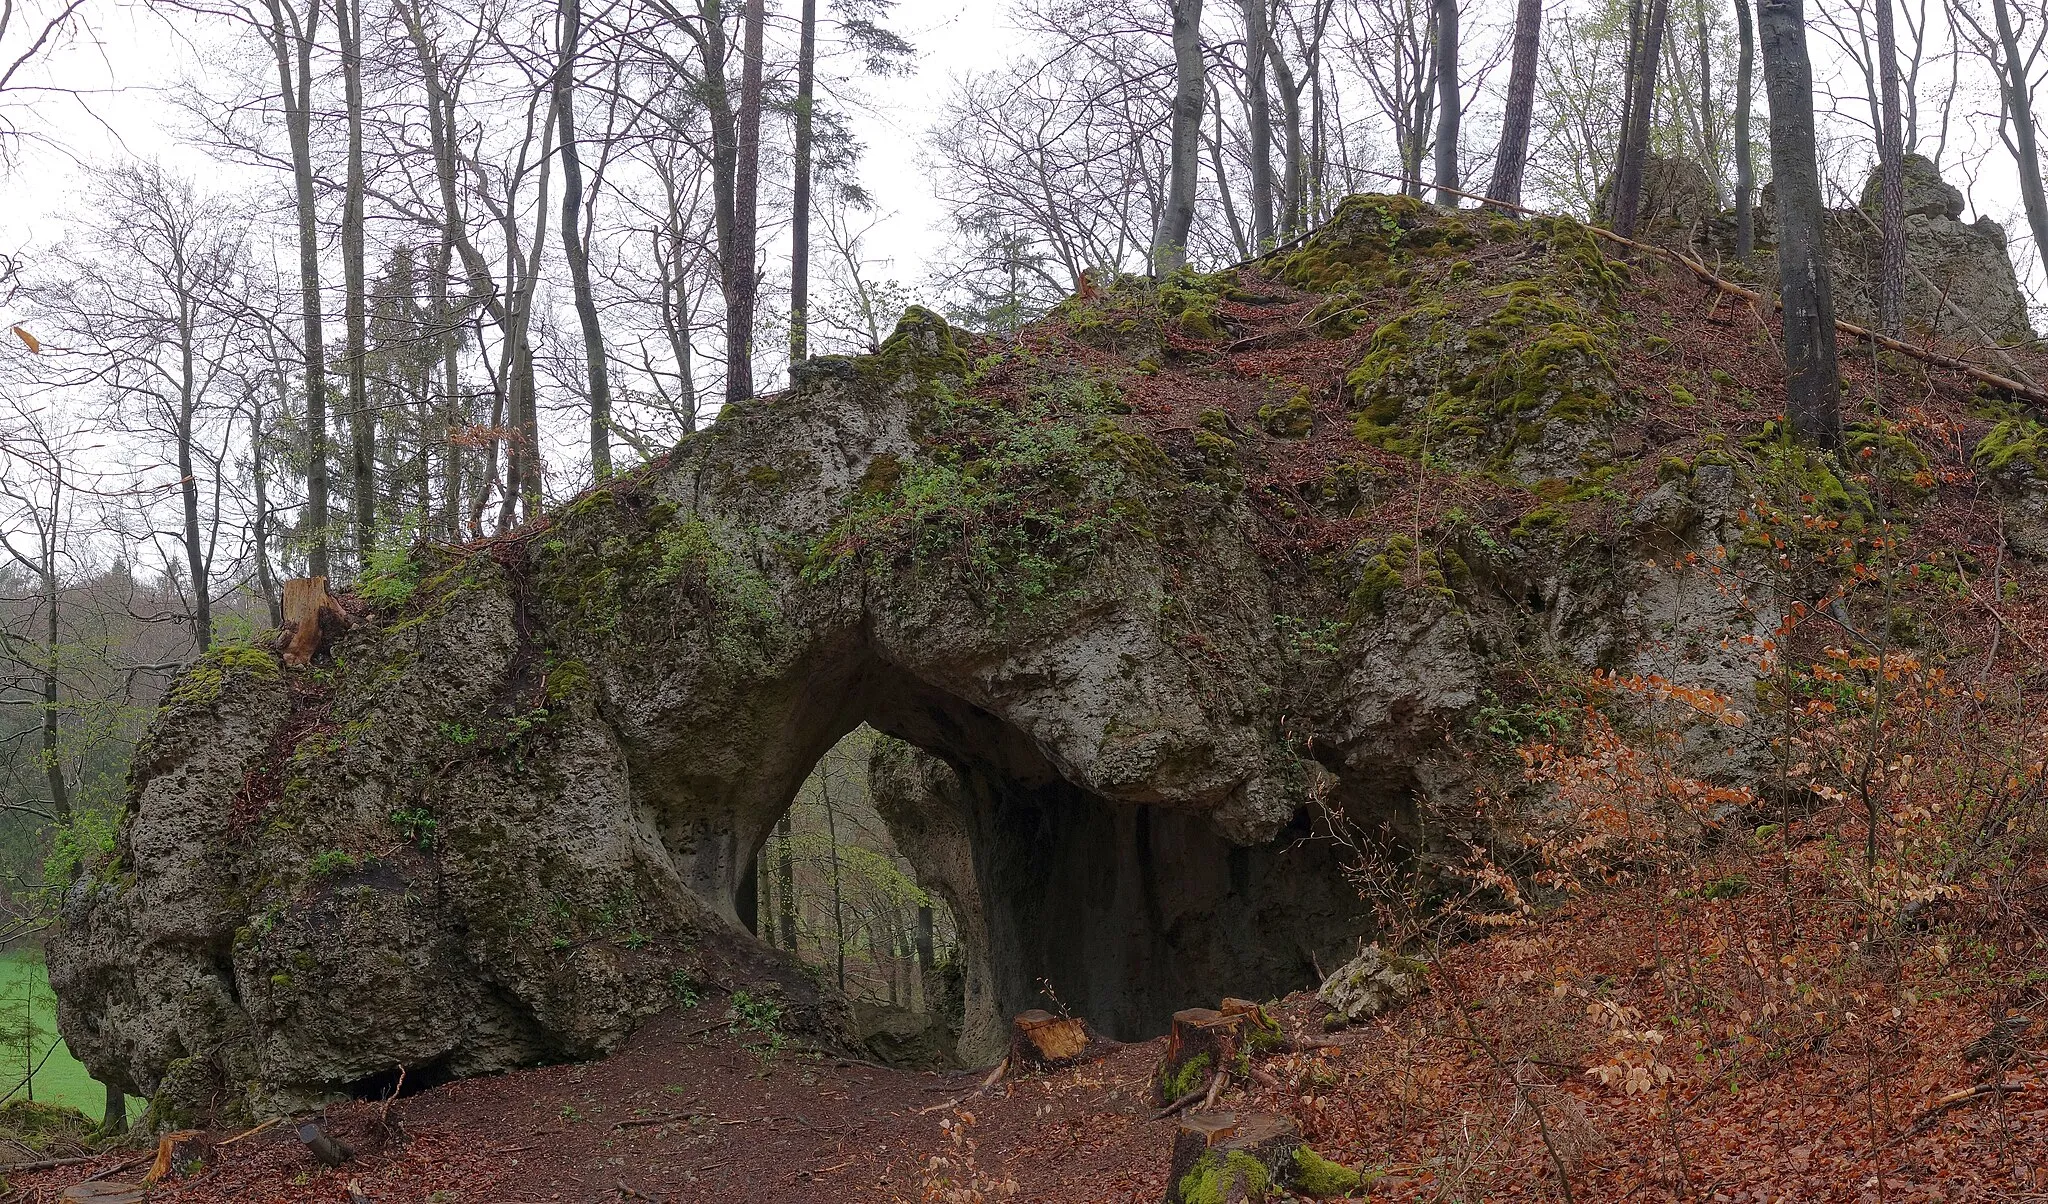 Photo showing: The south side of the Wassersteintor, a natural arch at the Großer Wasserstein, a rock cluster near the town of Betzenstein in northern Bavaria.